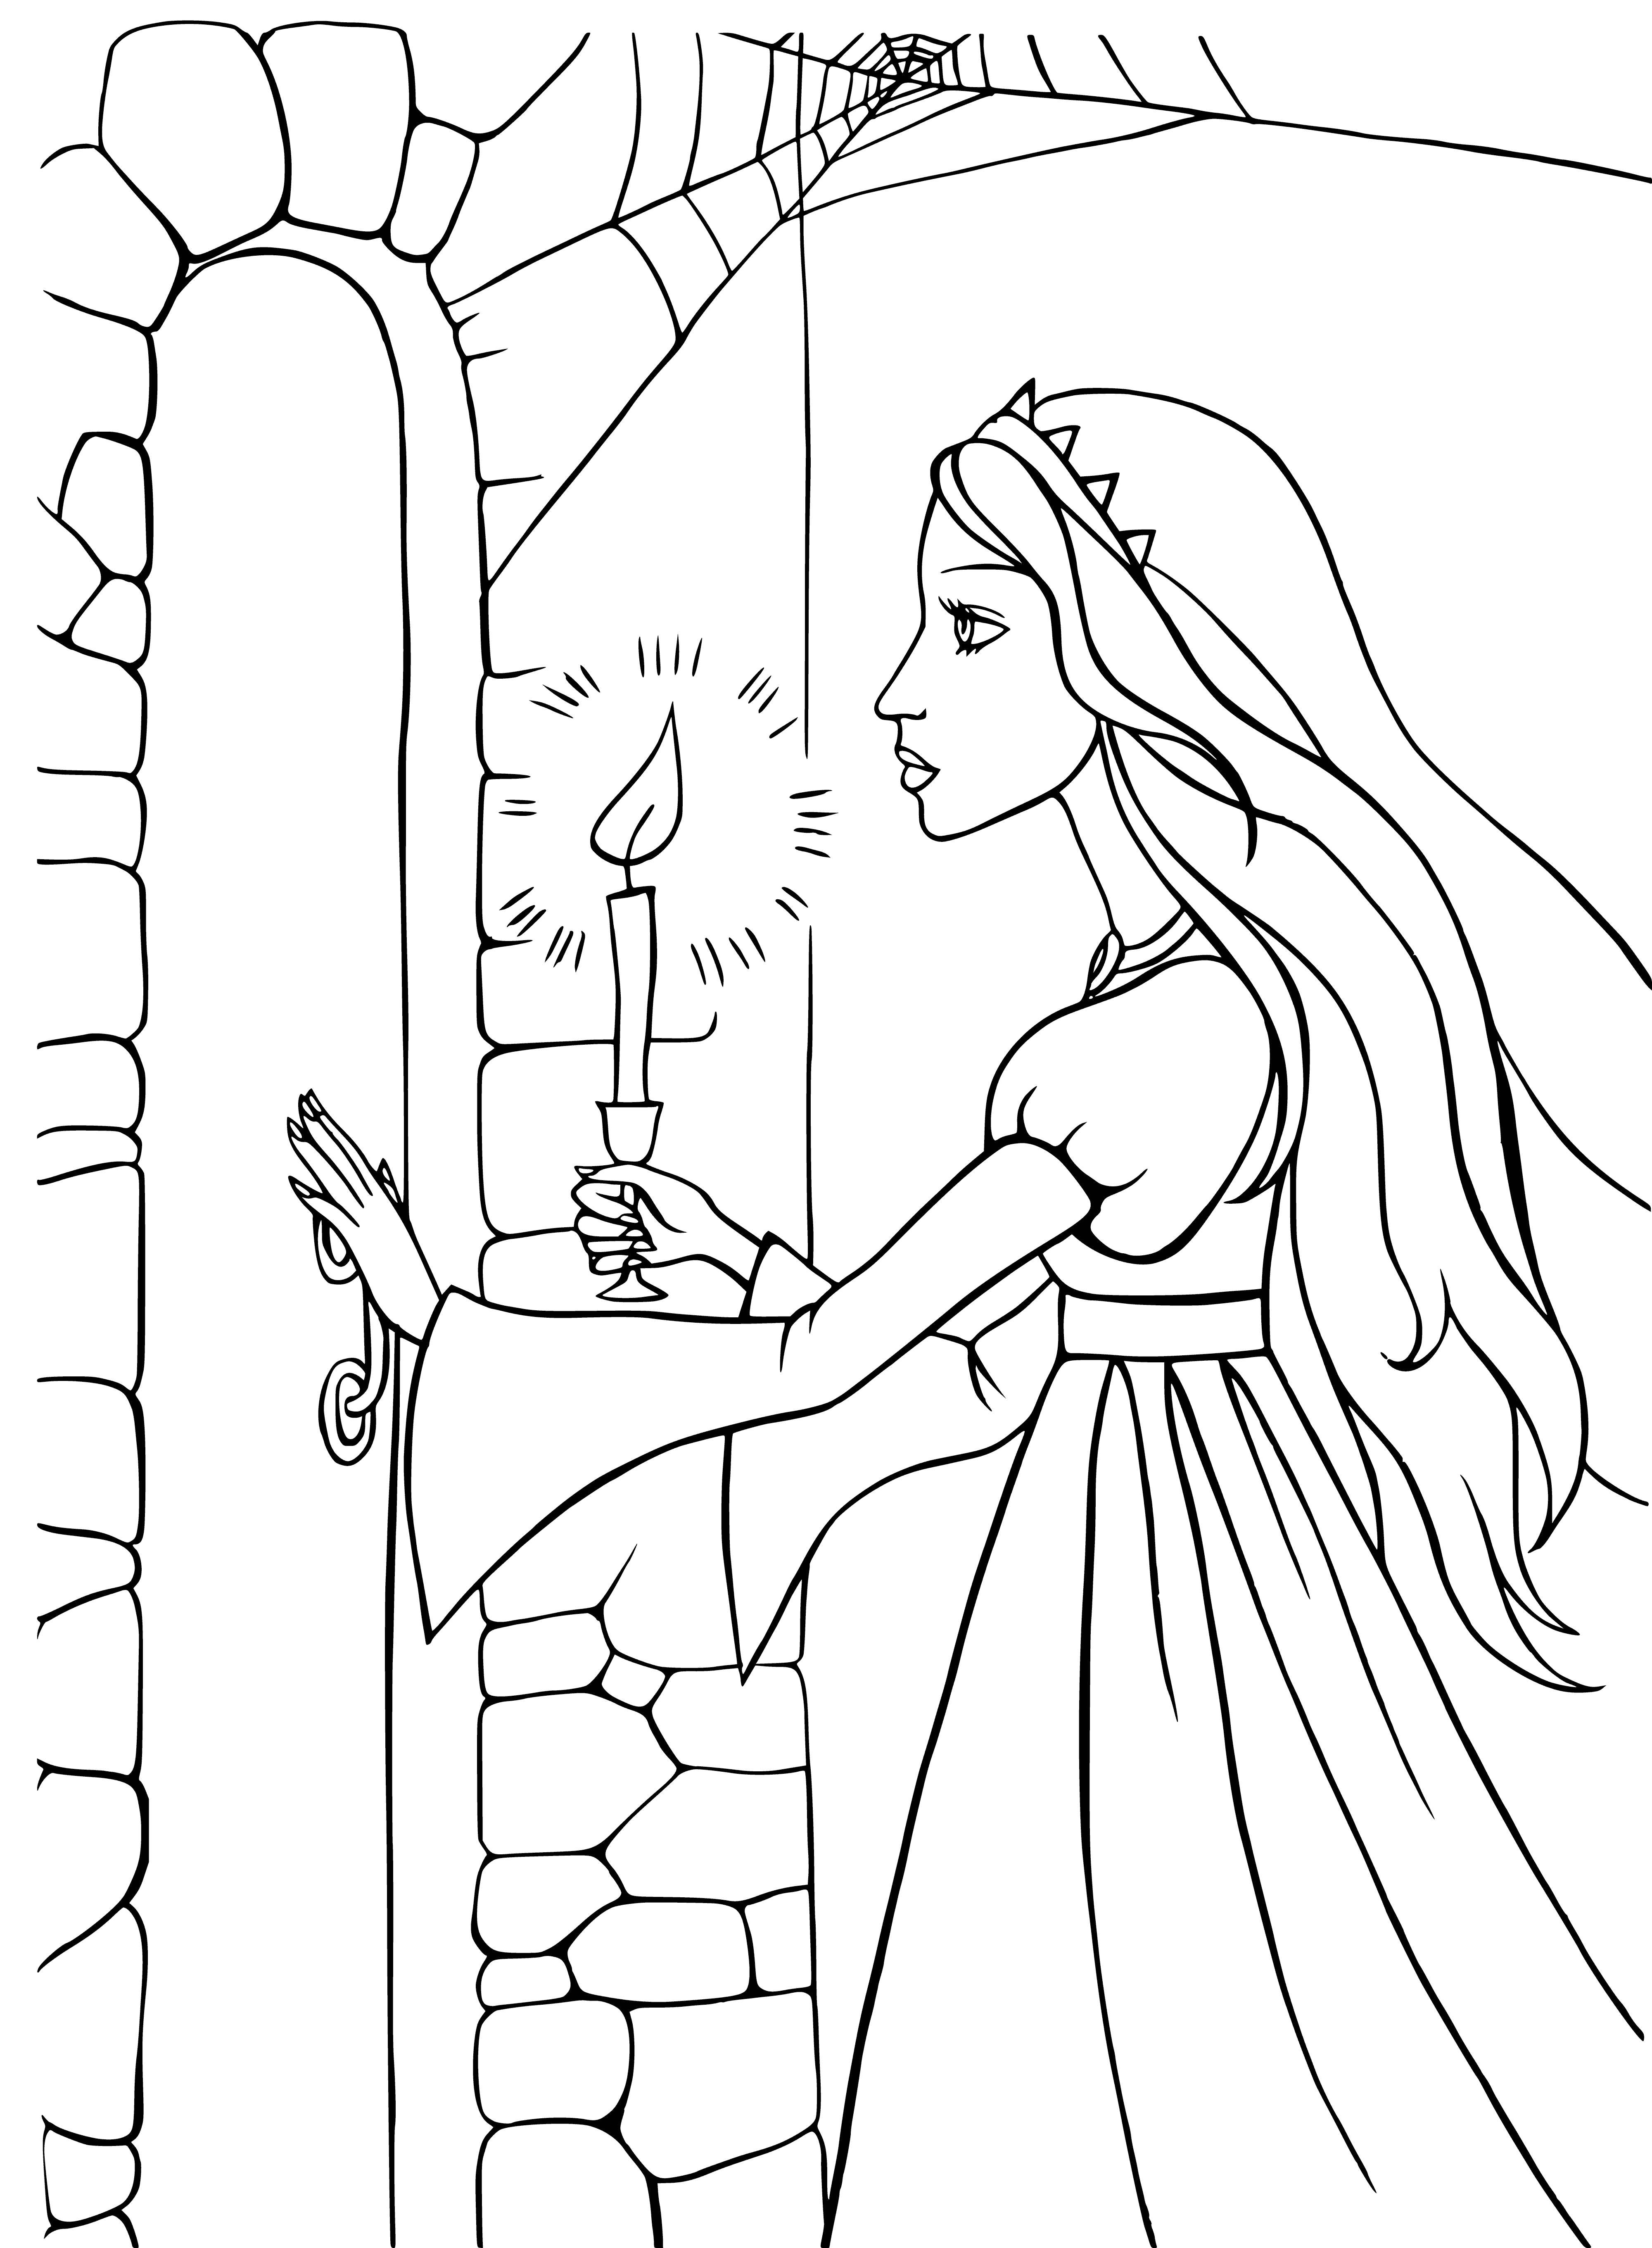 coloring page: A mysterious castle atop a hill in a forest, with ivy-covered turrets & stained glass windows. A drawbridge, heavy oak doors, & a hint of magic in the air. It's a fairytale waiting to be explored! #Fantasy